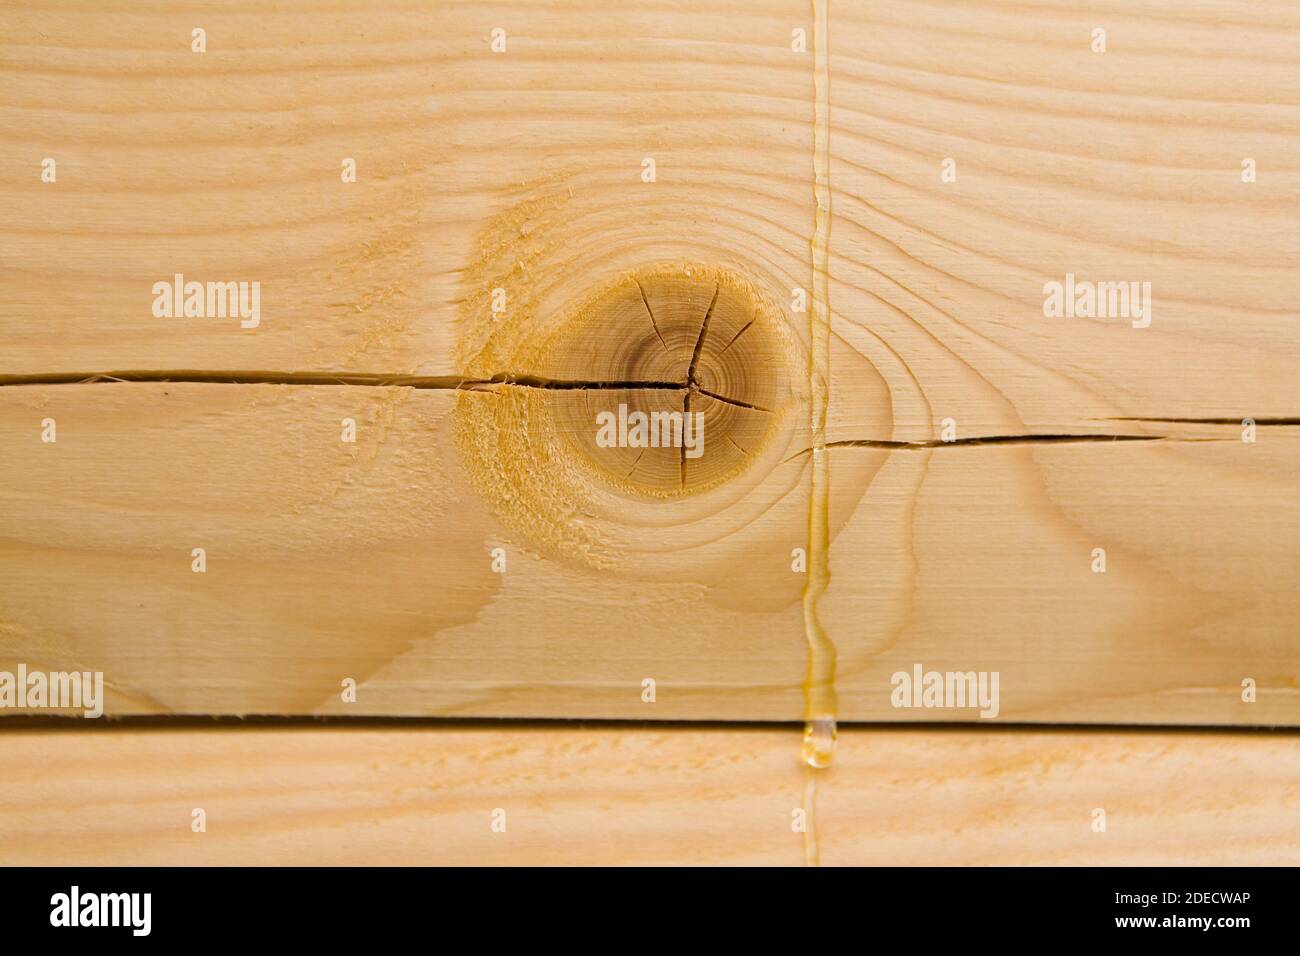 The resin flows over the treated wooden beam. Close-up. Stock Photo